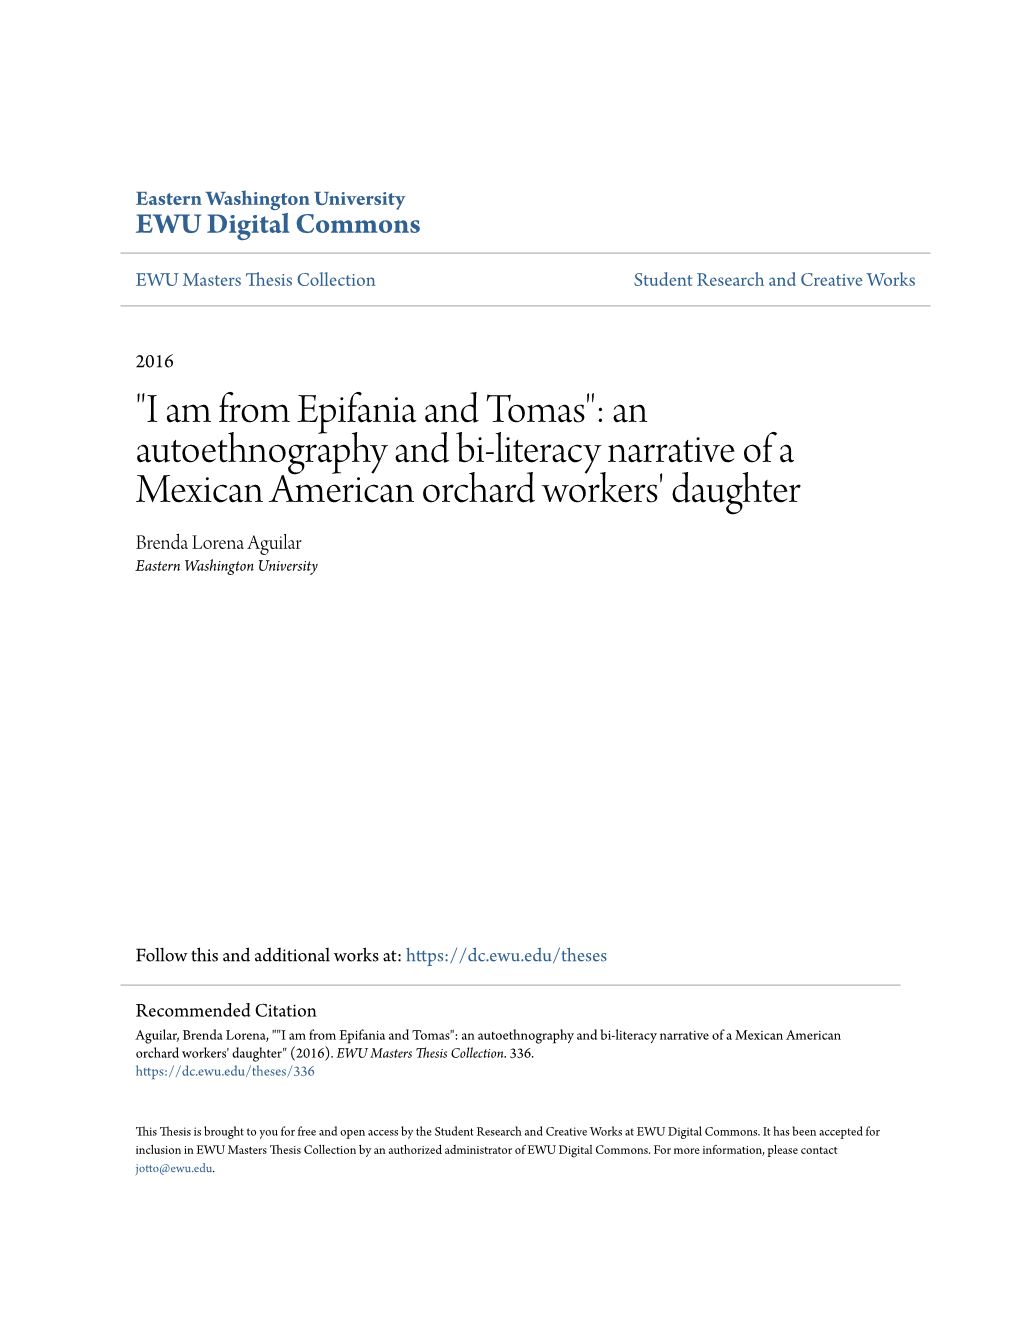 An Autoethnography and Bi-Literacy Narrative of a Mexican American Orchard Workers' Daughter Brenda Lorena Aguilar Eastern Washington University